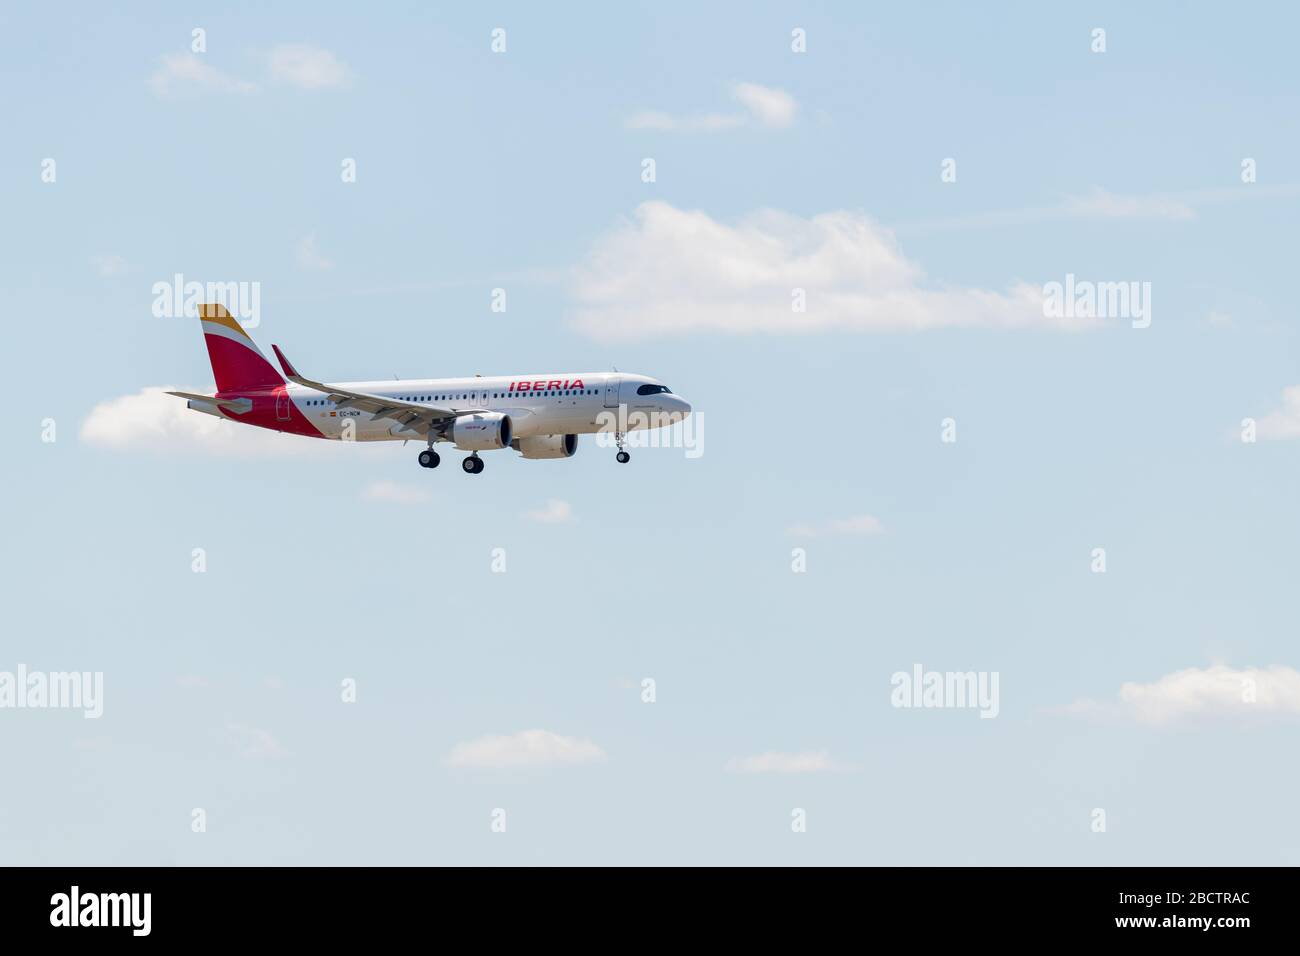 MADRID, SPAIN - APRIL 14, 2019: Iberia Airlines Airbus A320 passenger plane ready to land at Madrid-Barajas International Airport Adolfo Suárez, on a Stock Photo